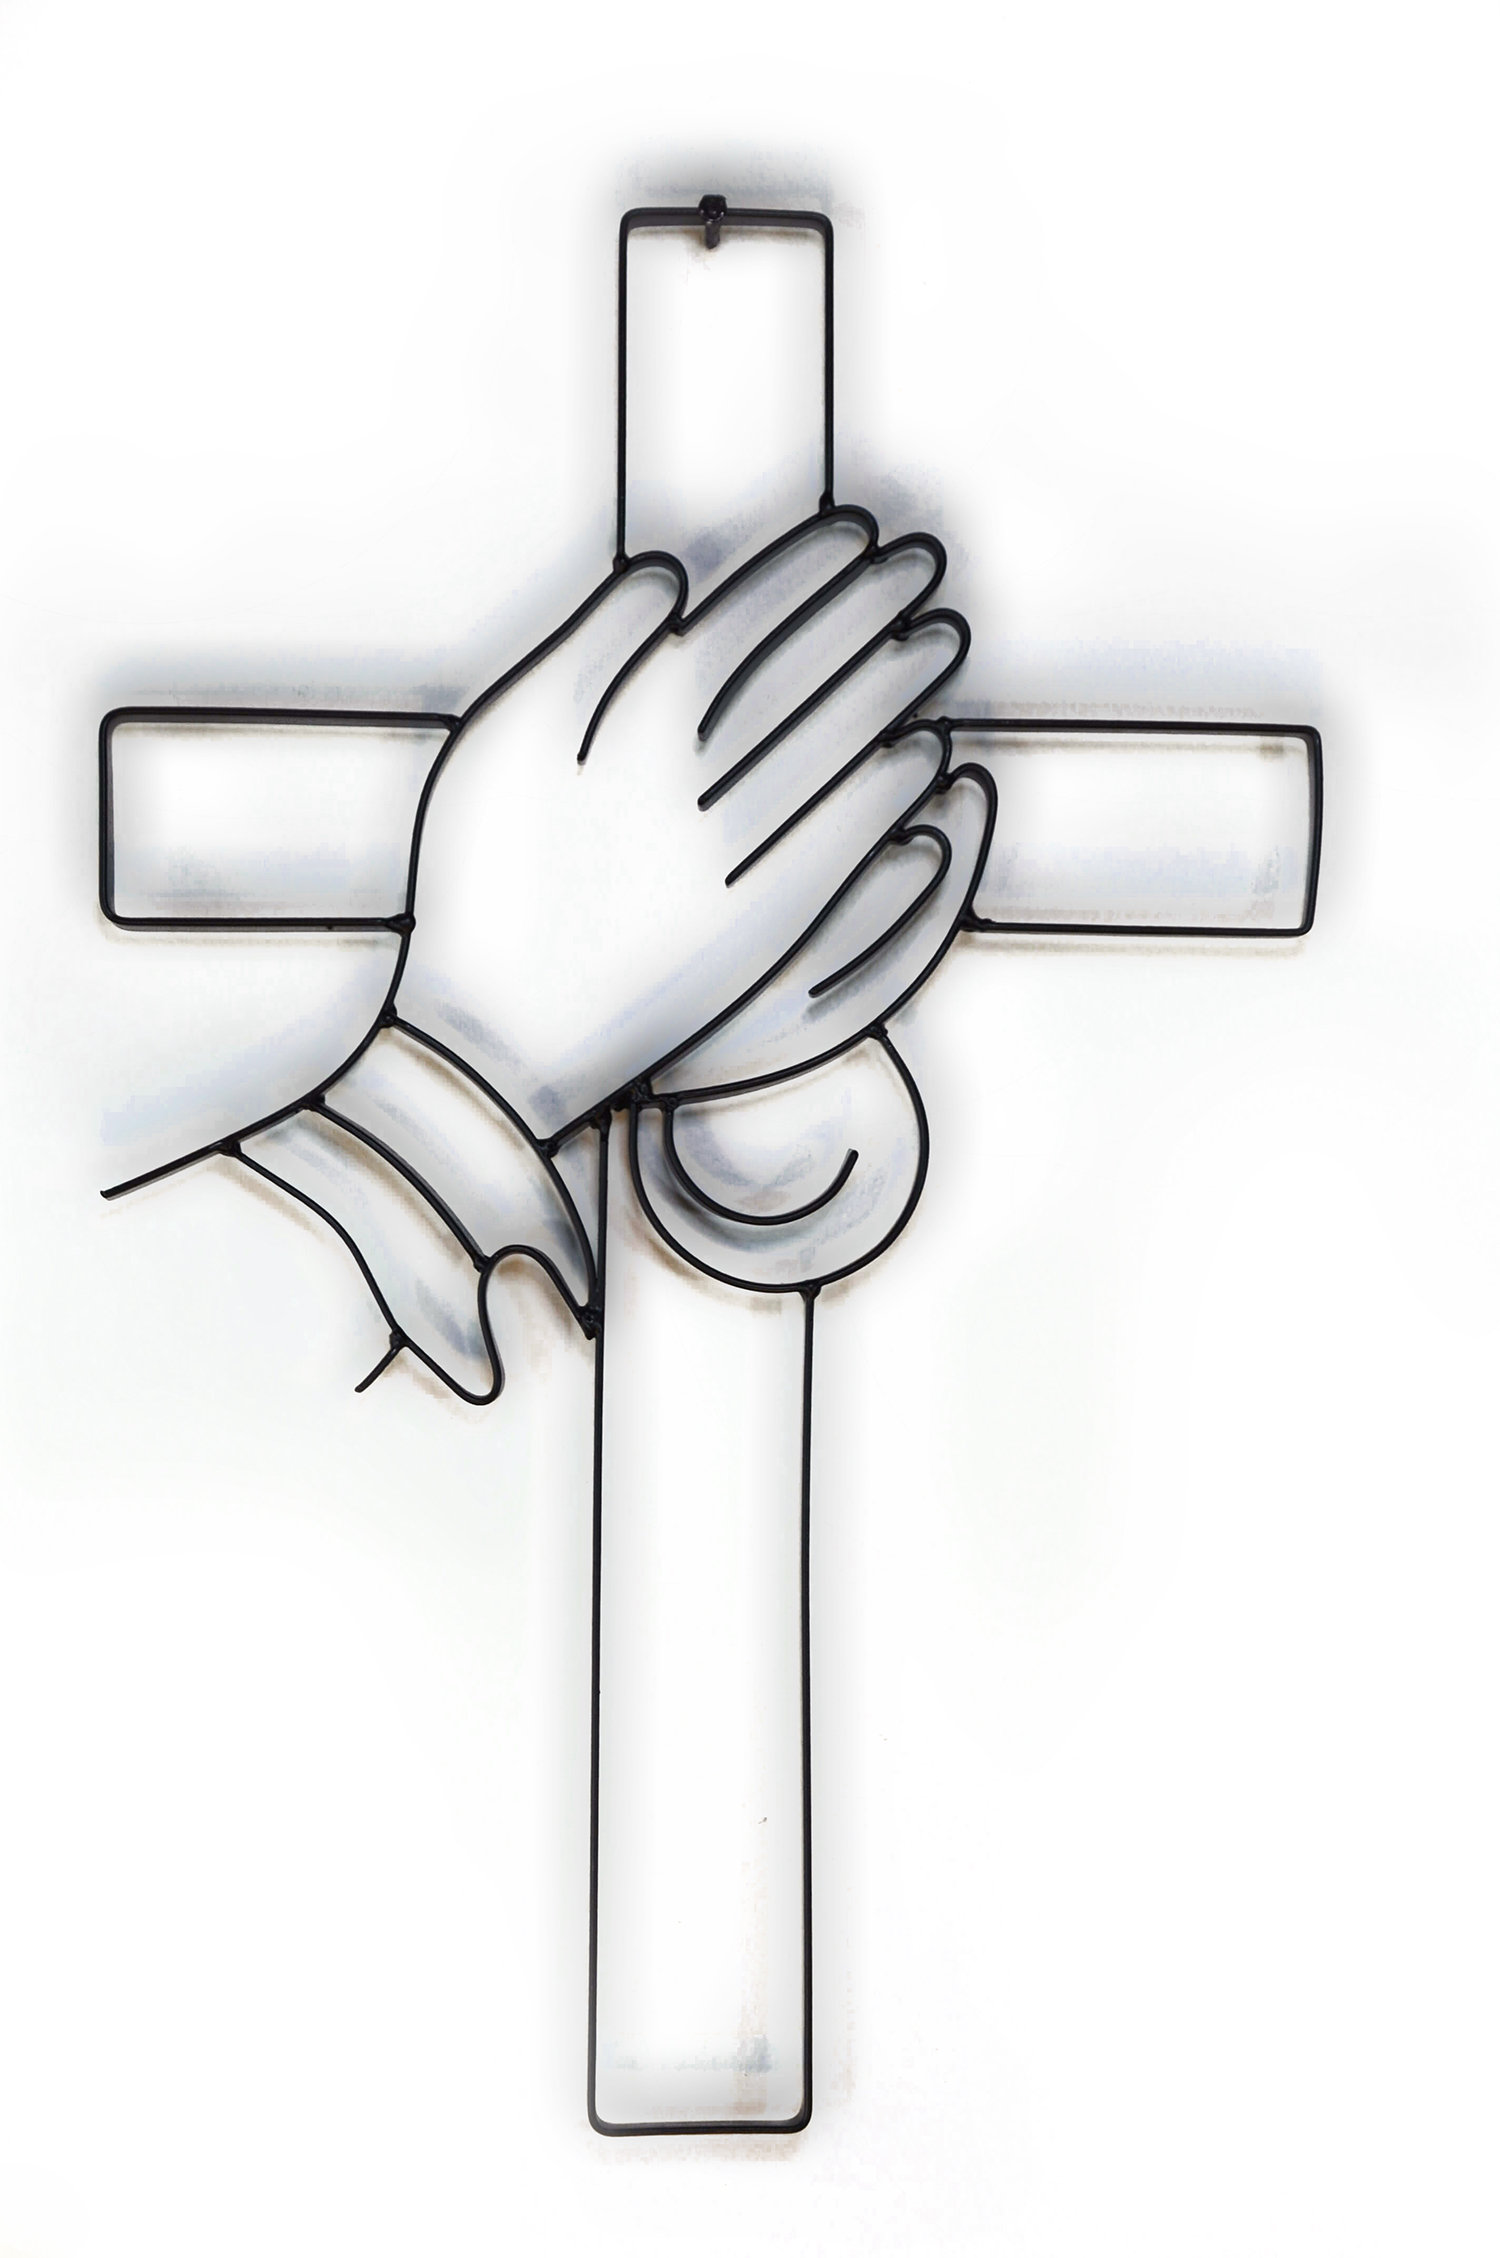 drawings of praying hands with a cross